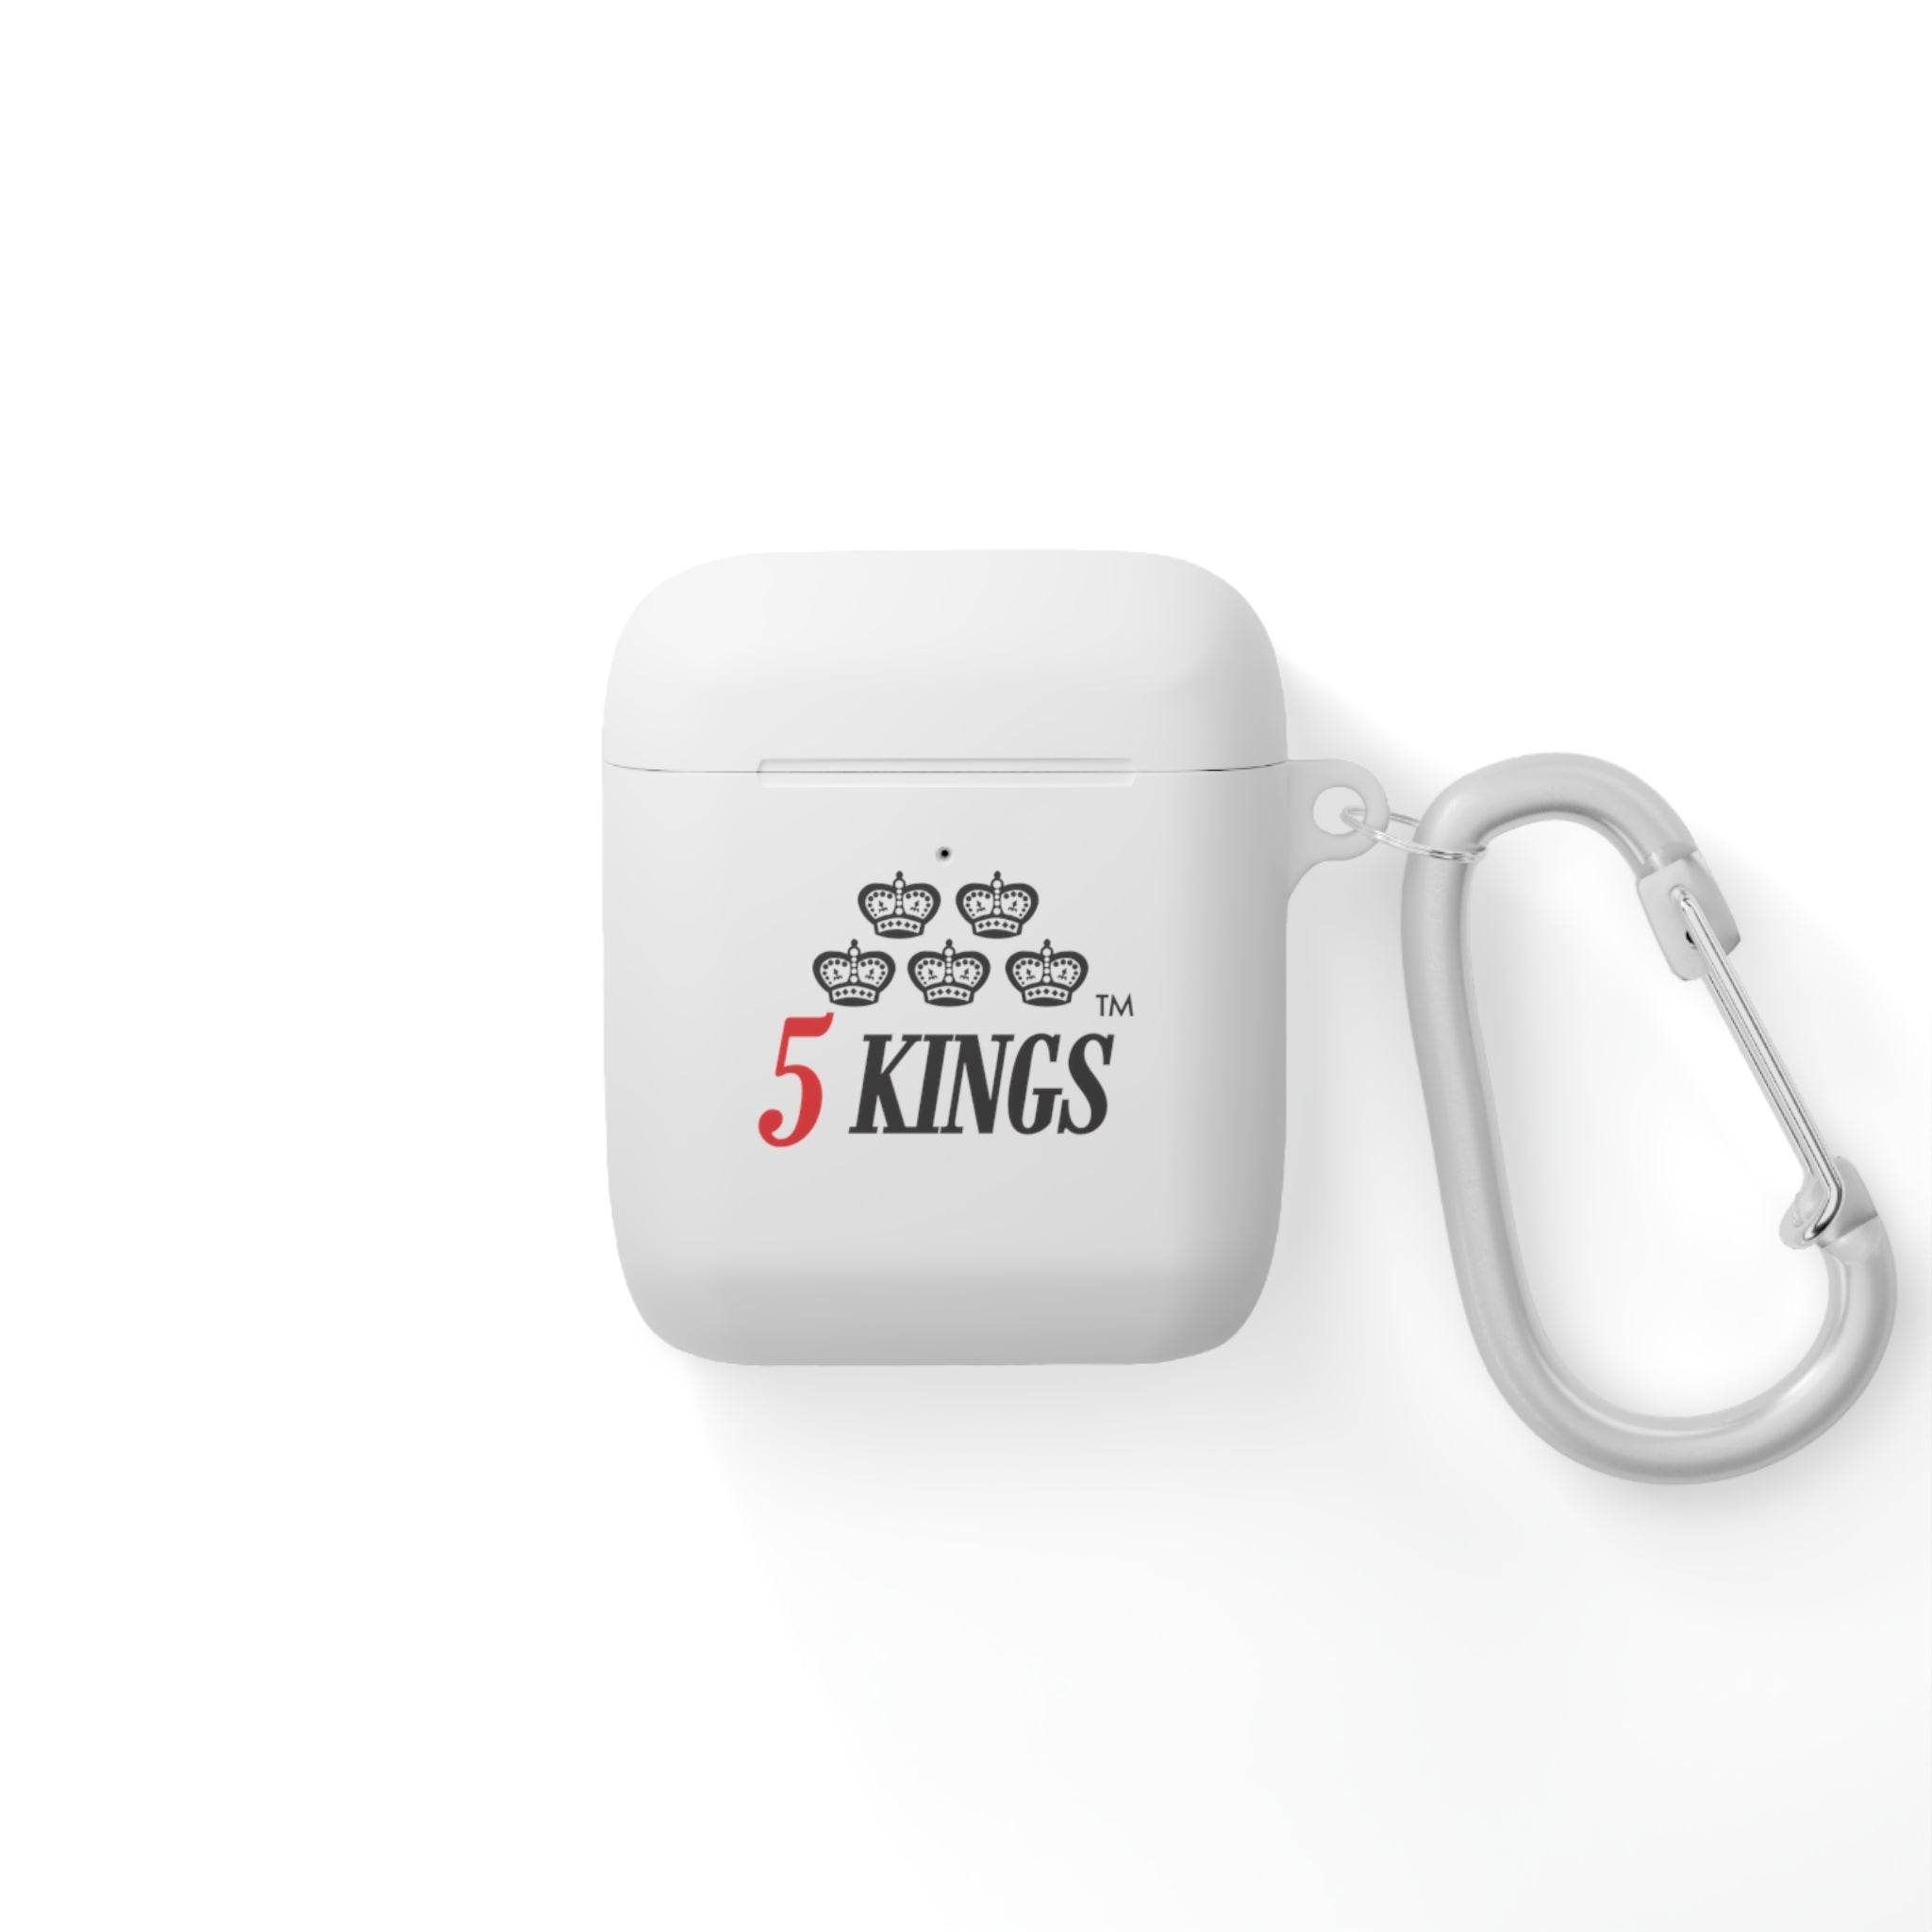 5 KINGS AirPods Pro Case Cover